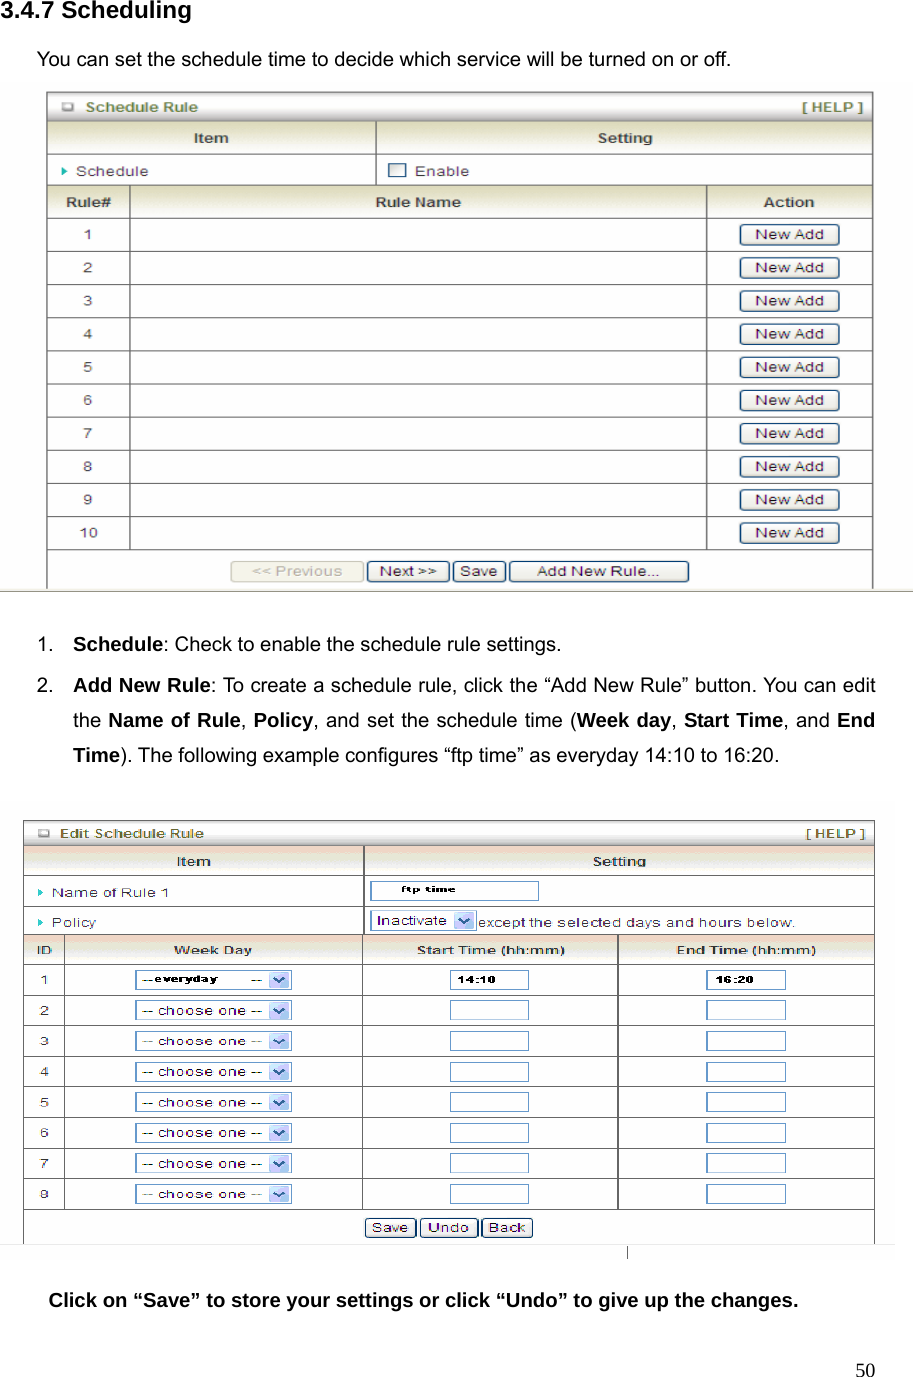  503.4.7 Scheduling  You can set the schedule time to decide which service will be turned on or off.     1.  Schedule: Check to enable the schedule rule settings.   2.  Add New Rule: To create a schedule rule, click the “Add New Rule” button. You can edit the Name of Rule, Policy, and set the schedule time (Week day, Start Time, and End Time). The following example configures “ftp time” as everyday 14:10 to 16:20.    Click on “Save” to store your settings or click “Undo” to give up the changes. 